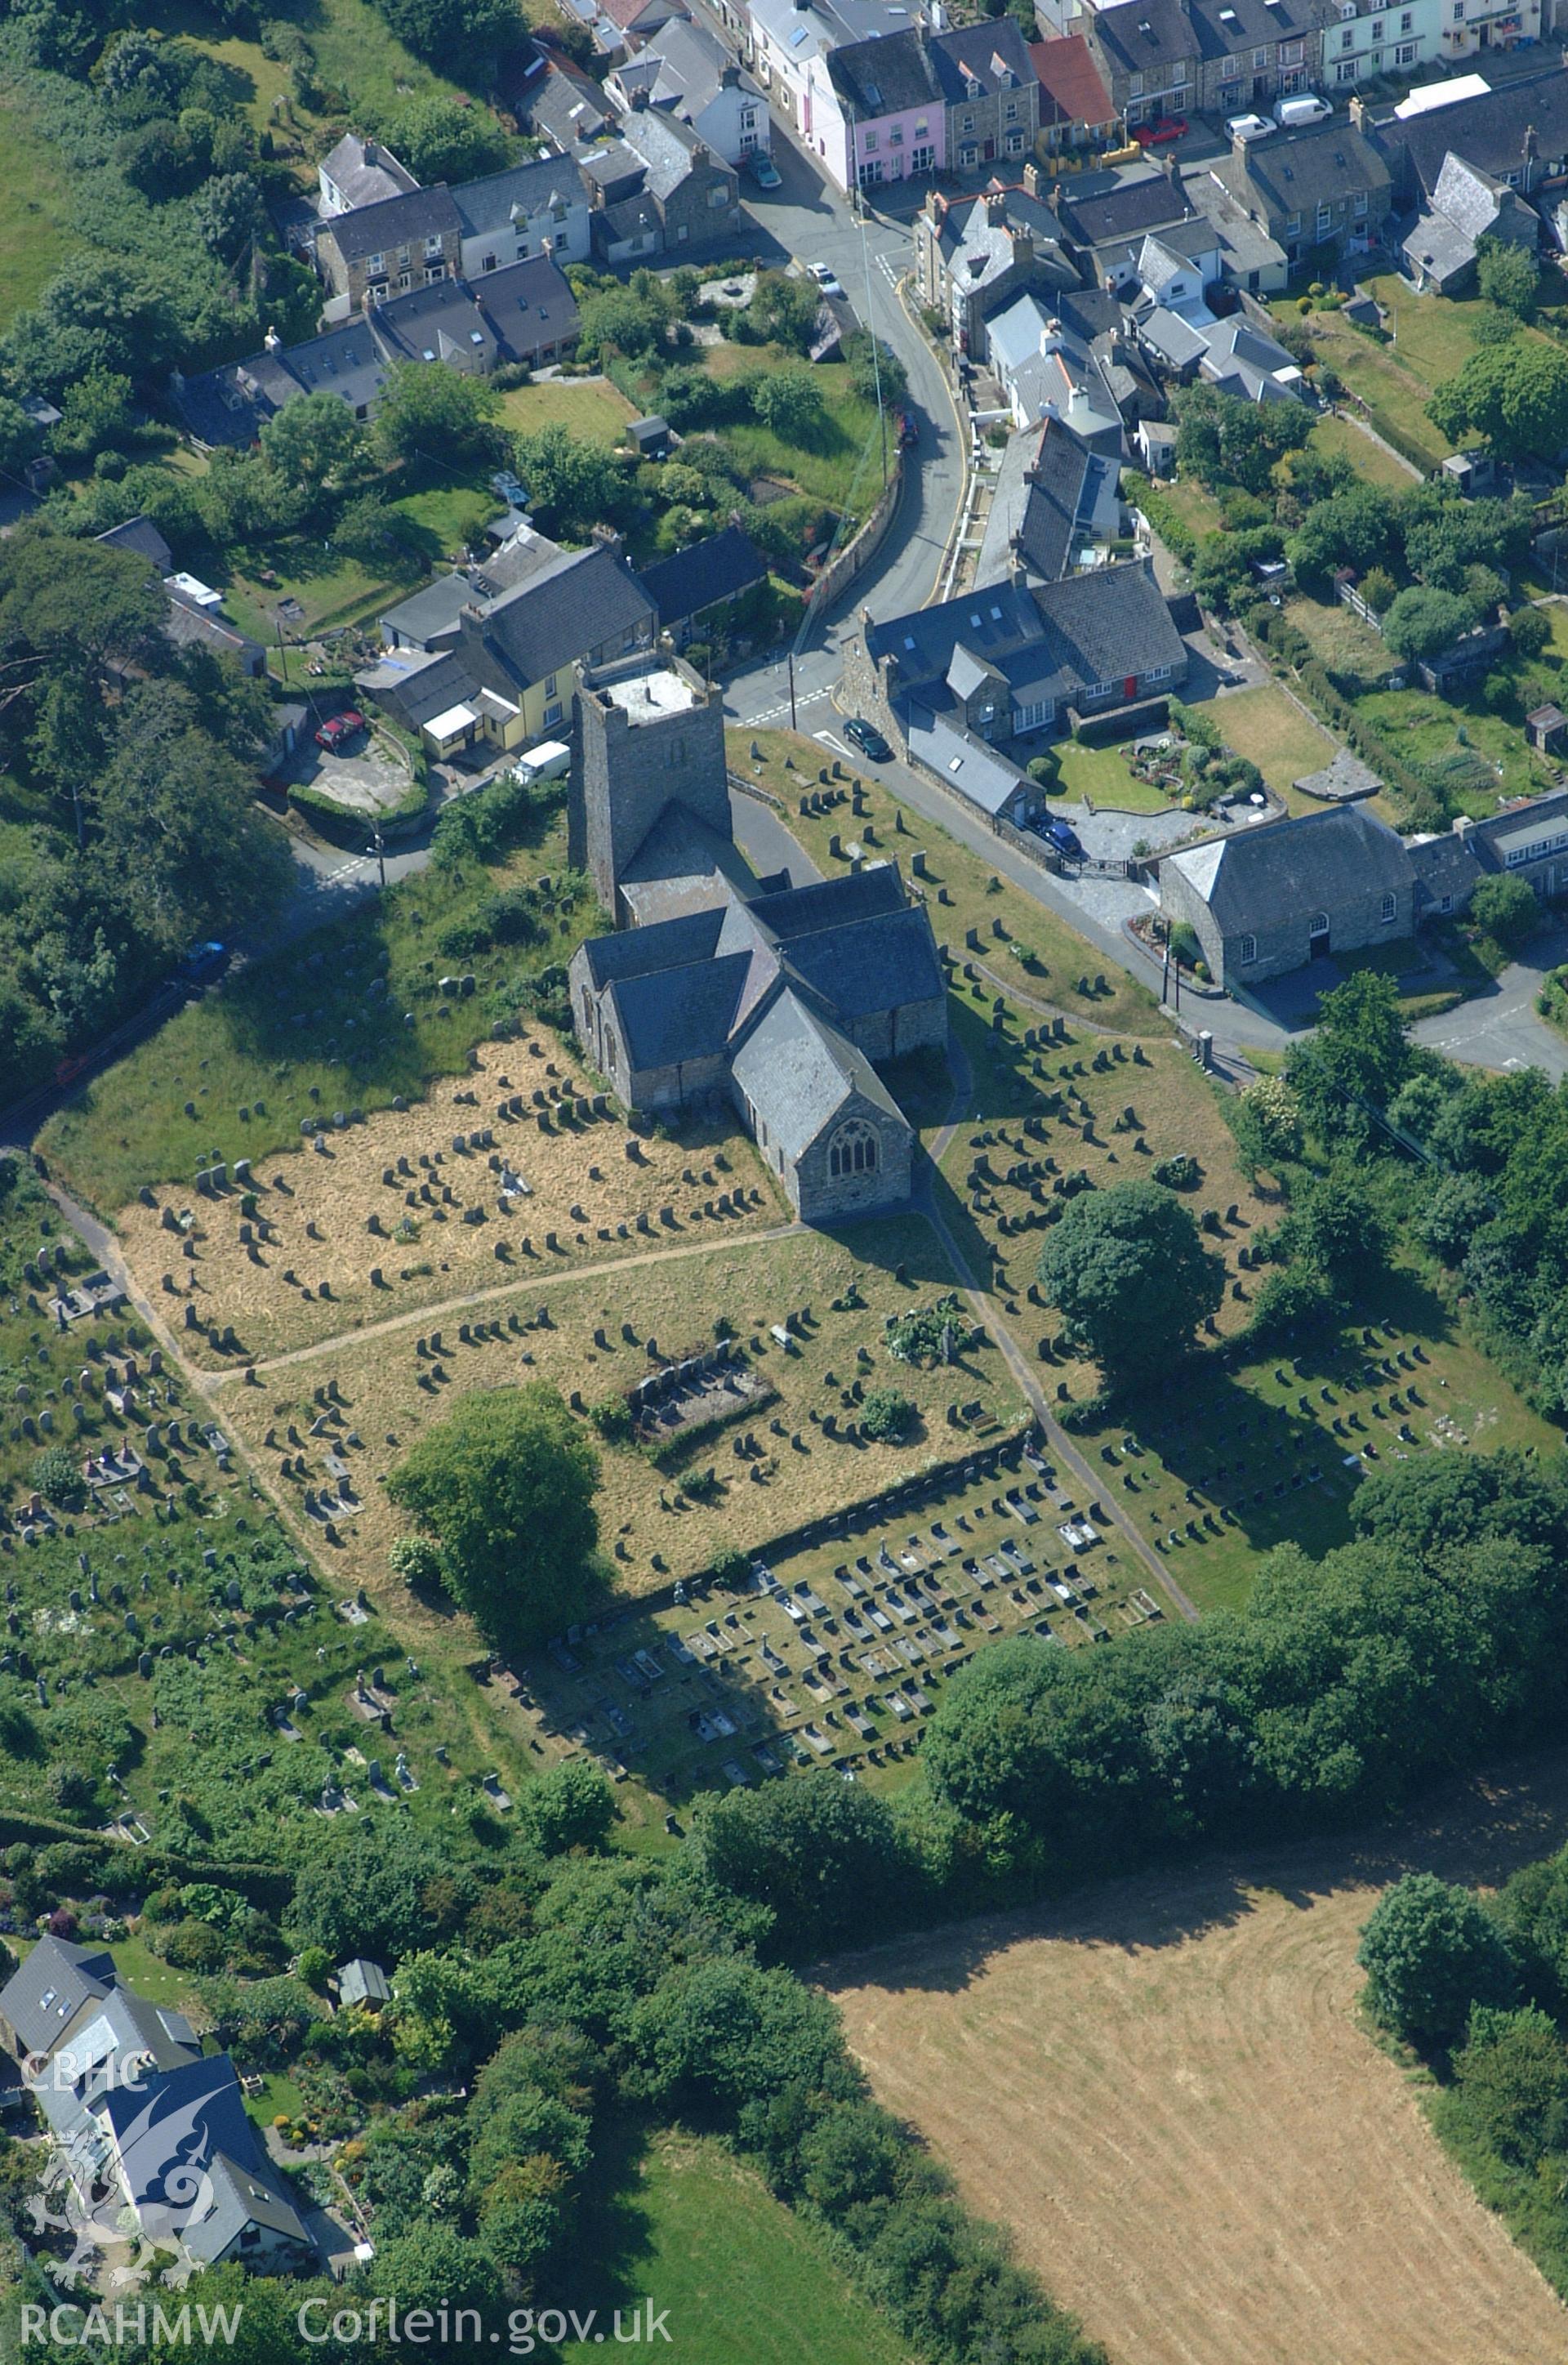 RCAHMW colour oblique aerial photograph of St Mary's Church, Newport taken on 15/06/2004 by Toby Driver